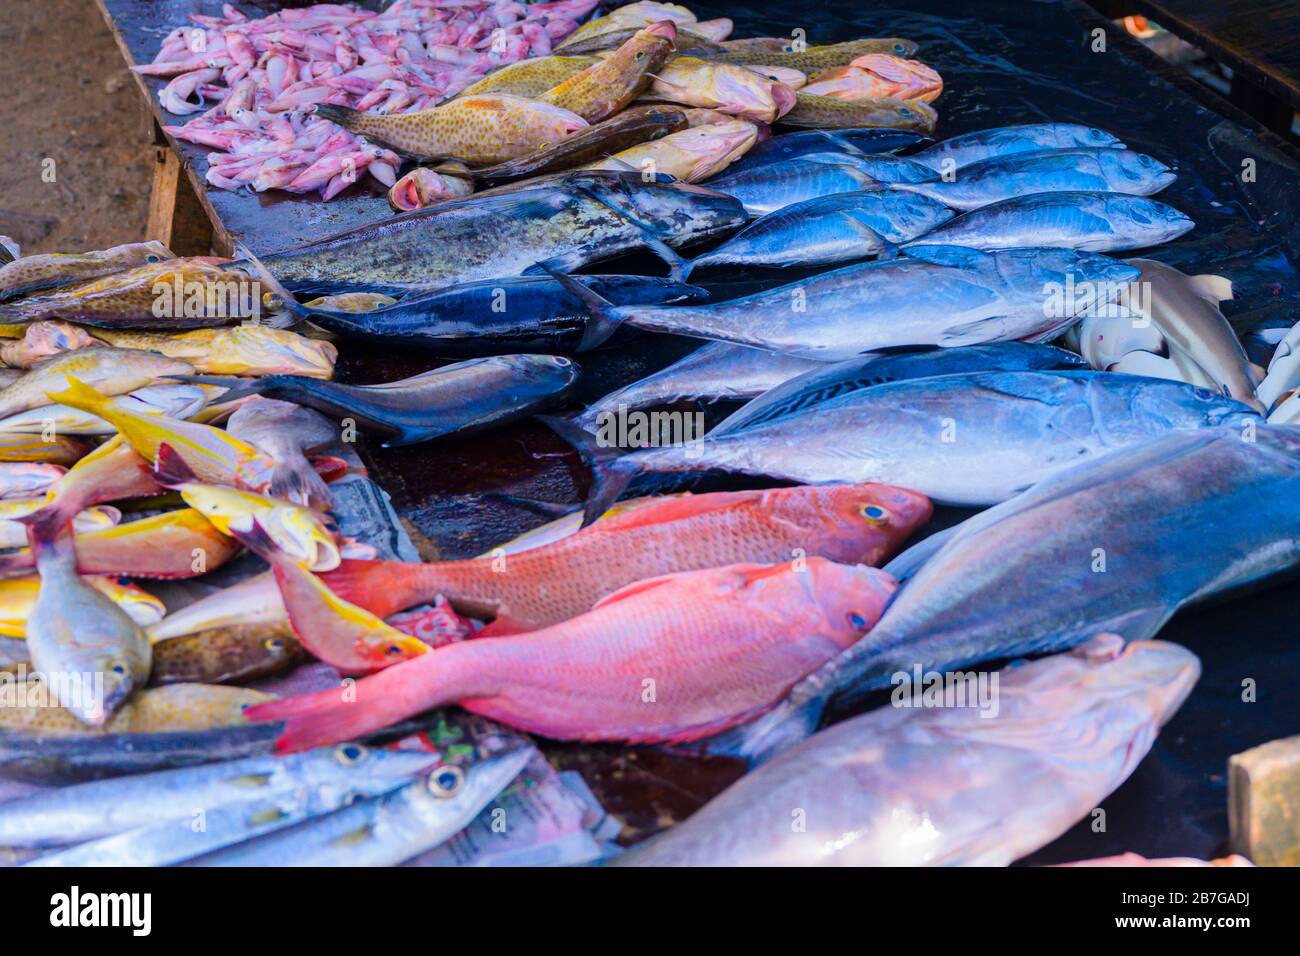 South Asia Sri Lanka Fort Galle colonial town centre old ancient harbour port fresh fish stall bream mullet tuna squid pickhandle barracuda snapper Stock Photo